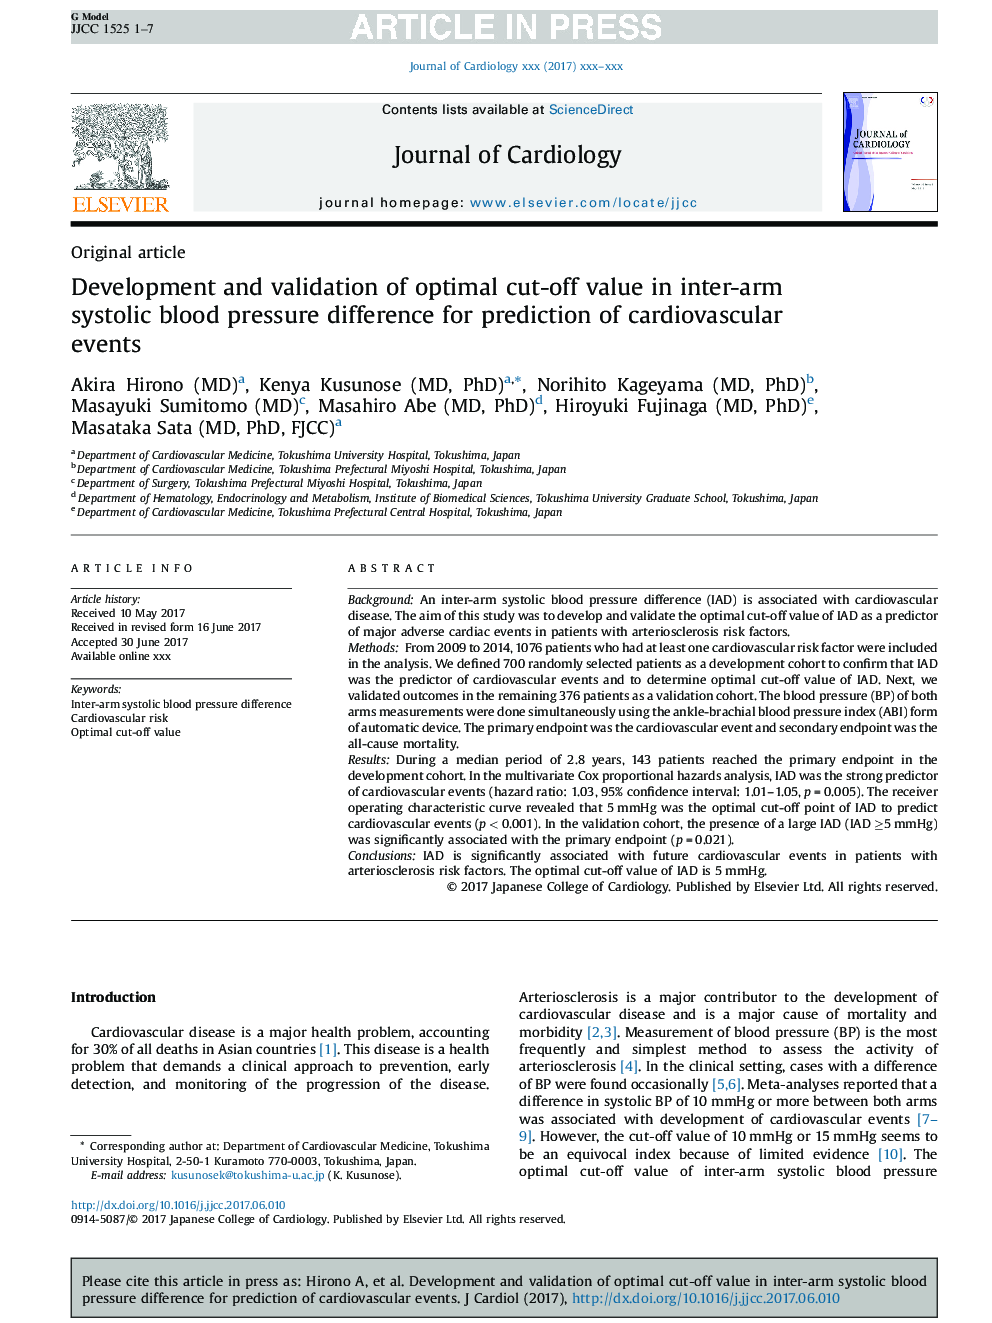 Development and validation of optimal cut-off value in inter-arm systolic blood pressure difference for prediction of cardiovascular events